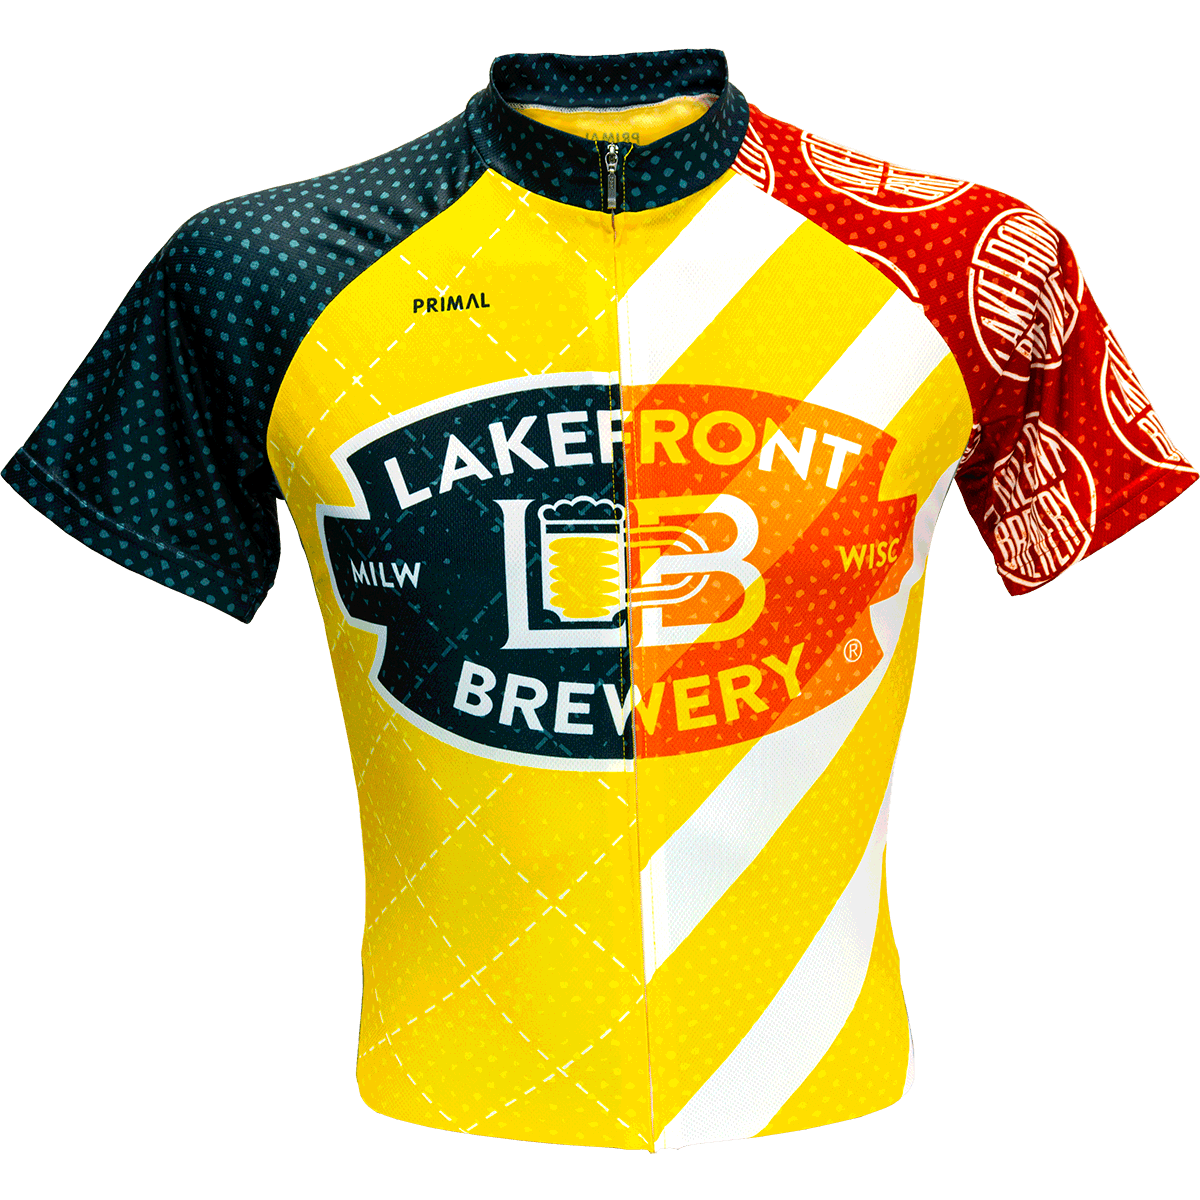 Bright Brewery, Cyclepath, Giant Cycling Jersey - Bright Brewery, MountainCrafted Beer